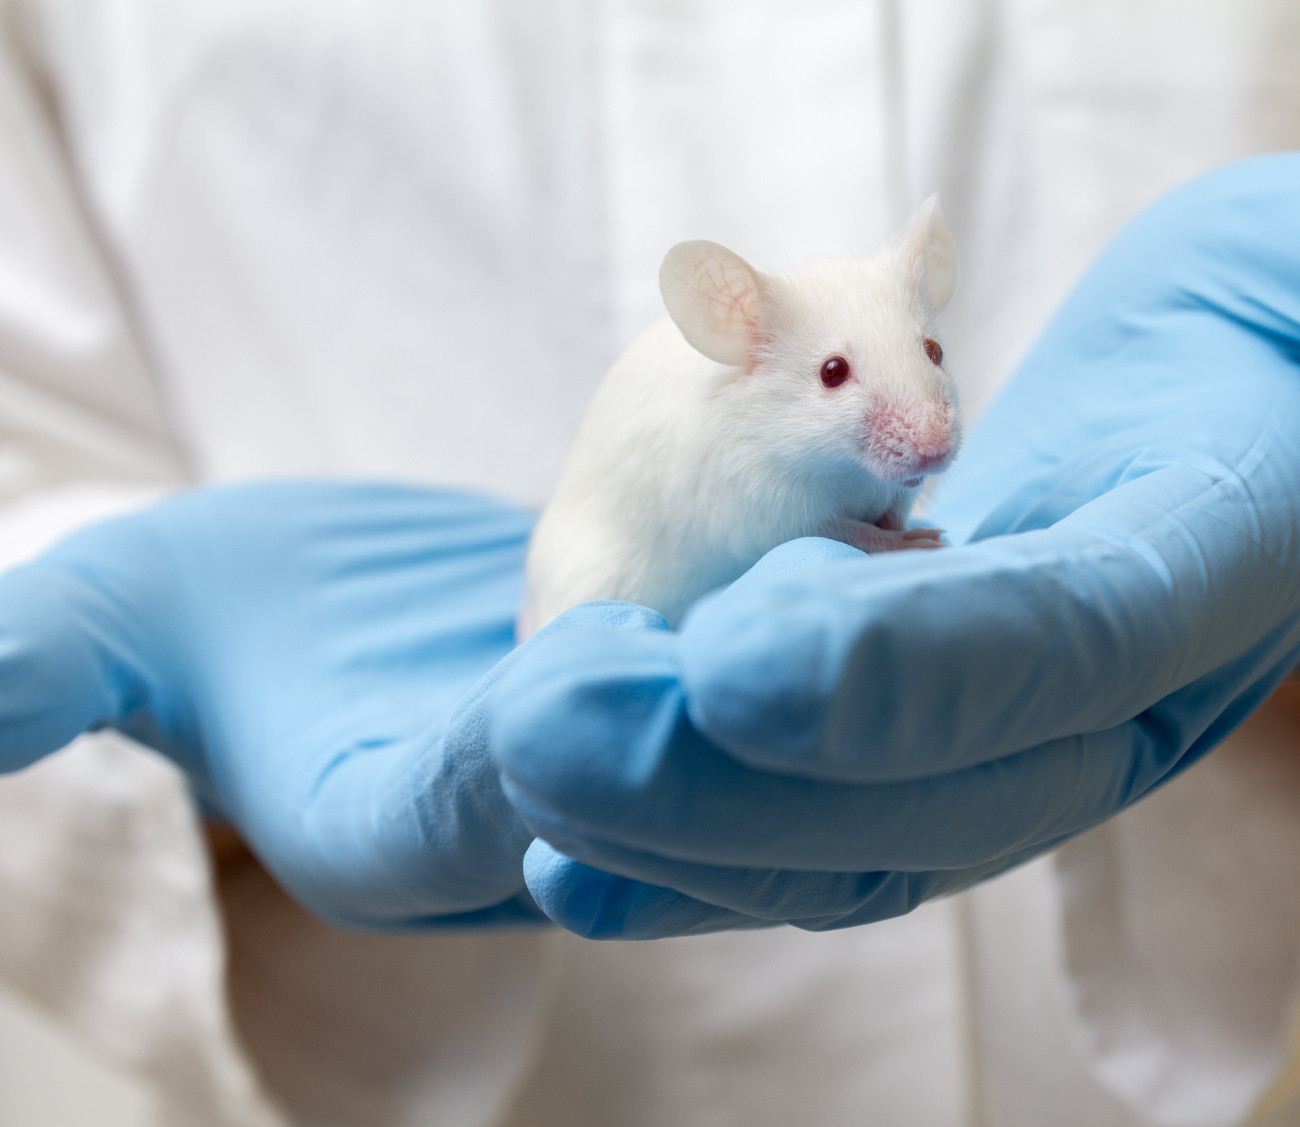 A white mouse on a technician's gloved hands